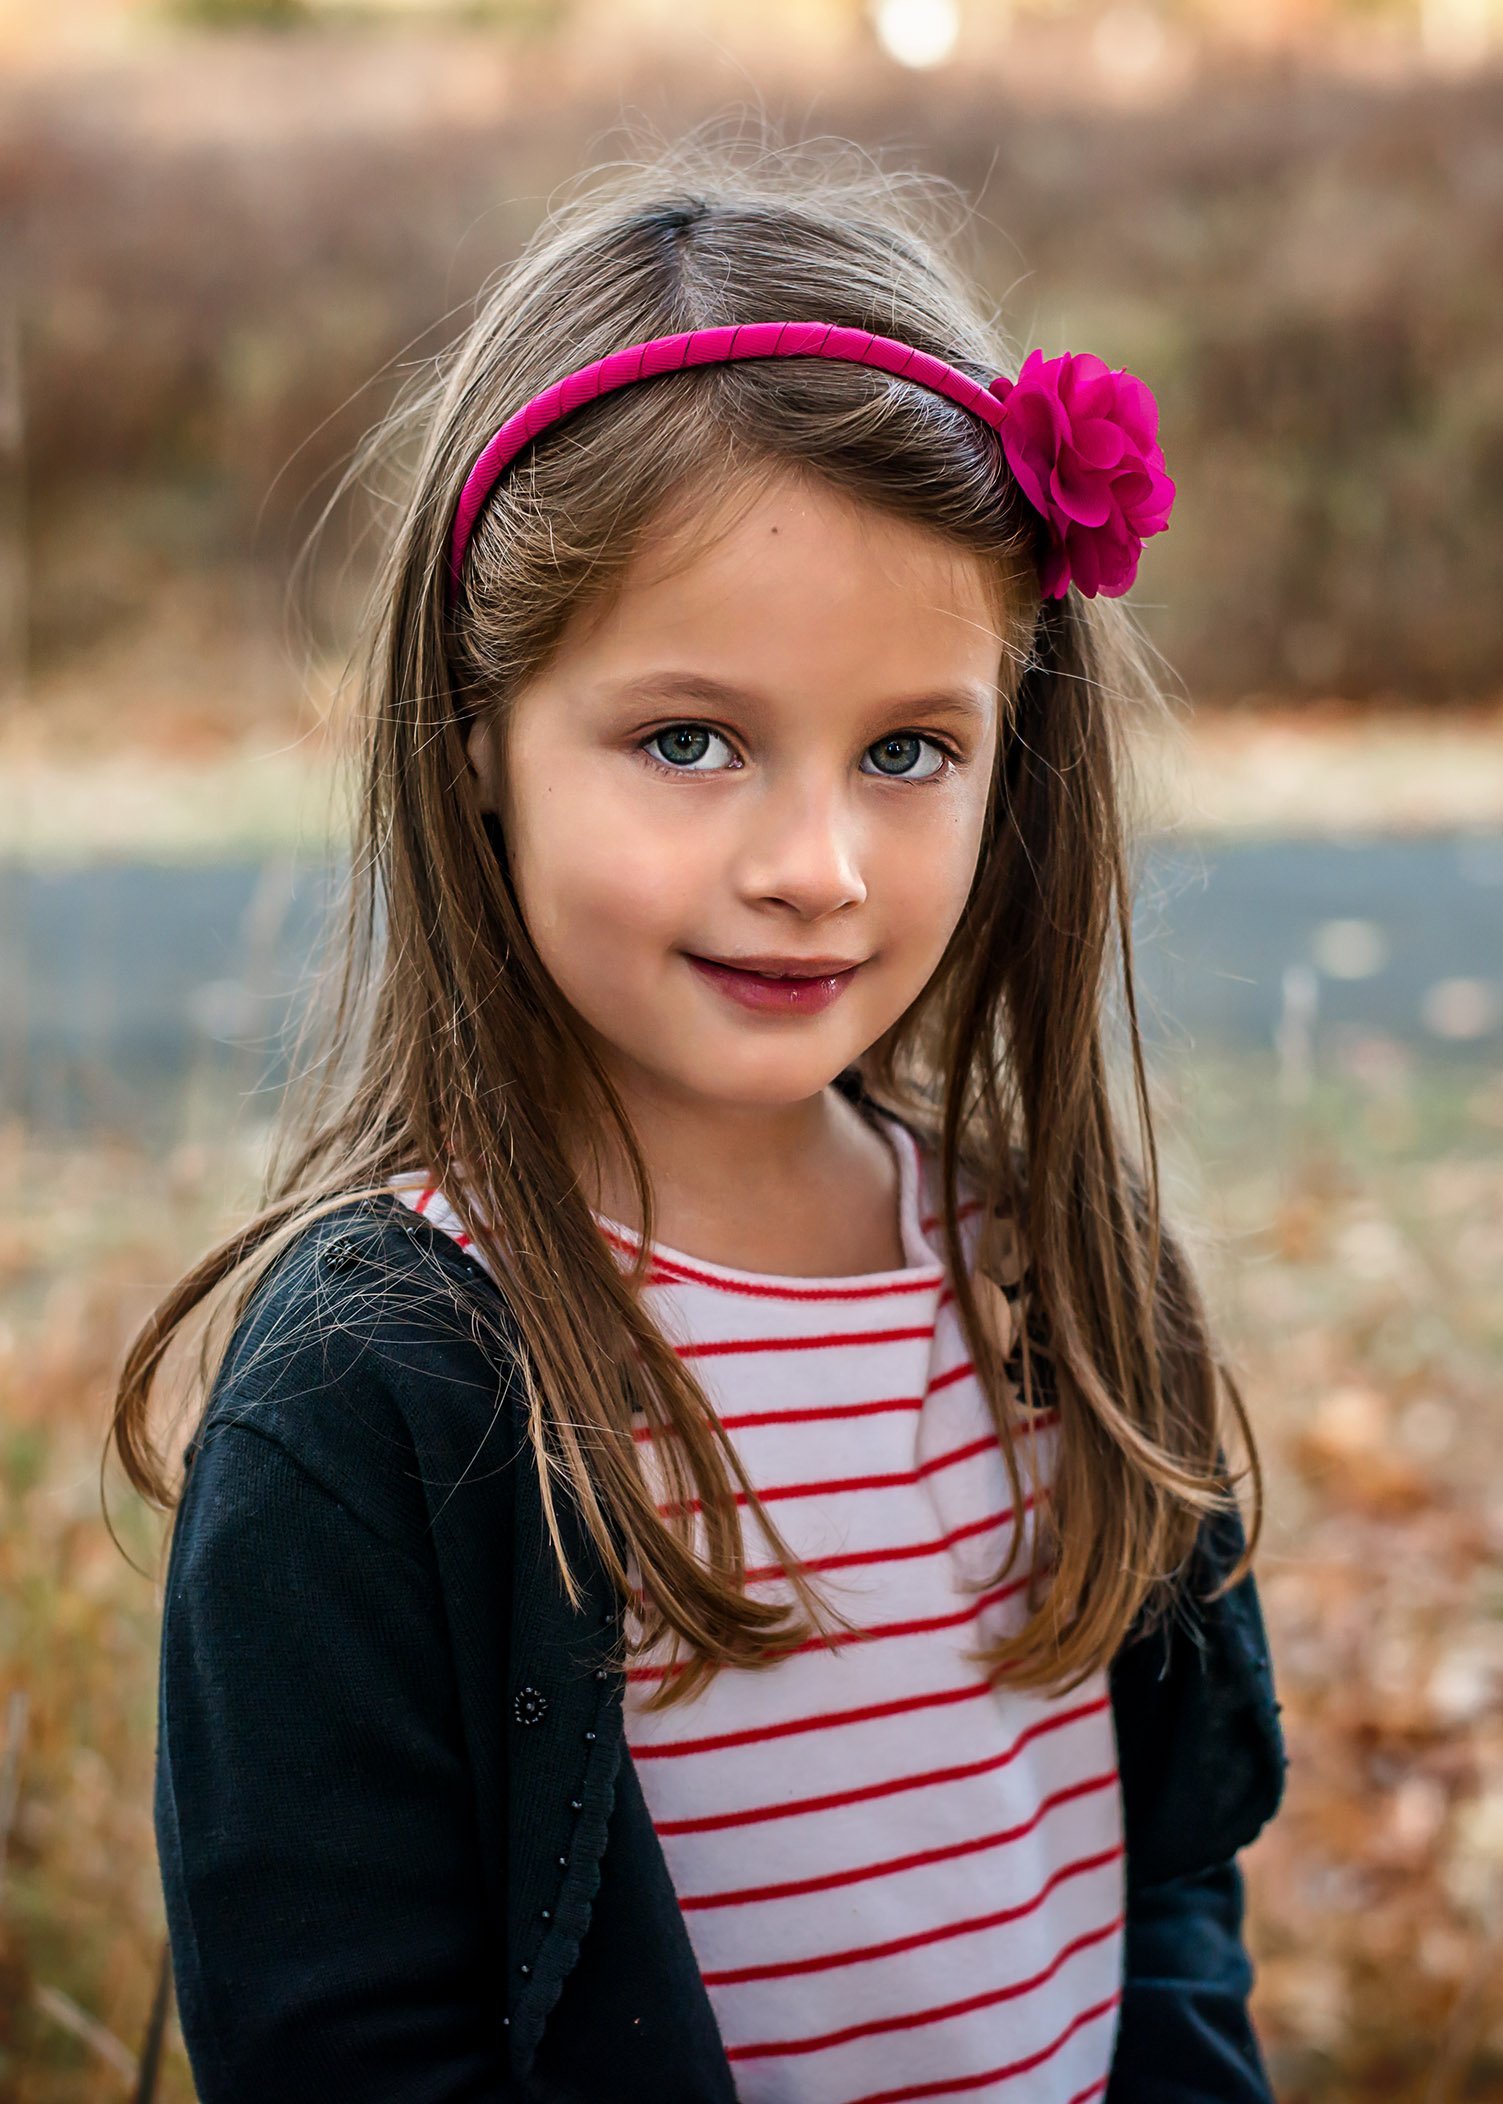 headshot of young girl wearing a bright pink headband in fall